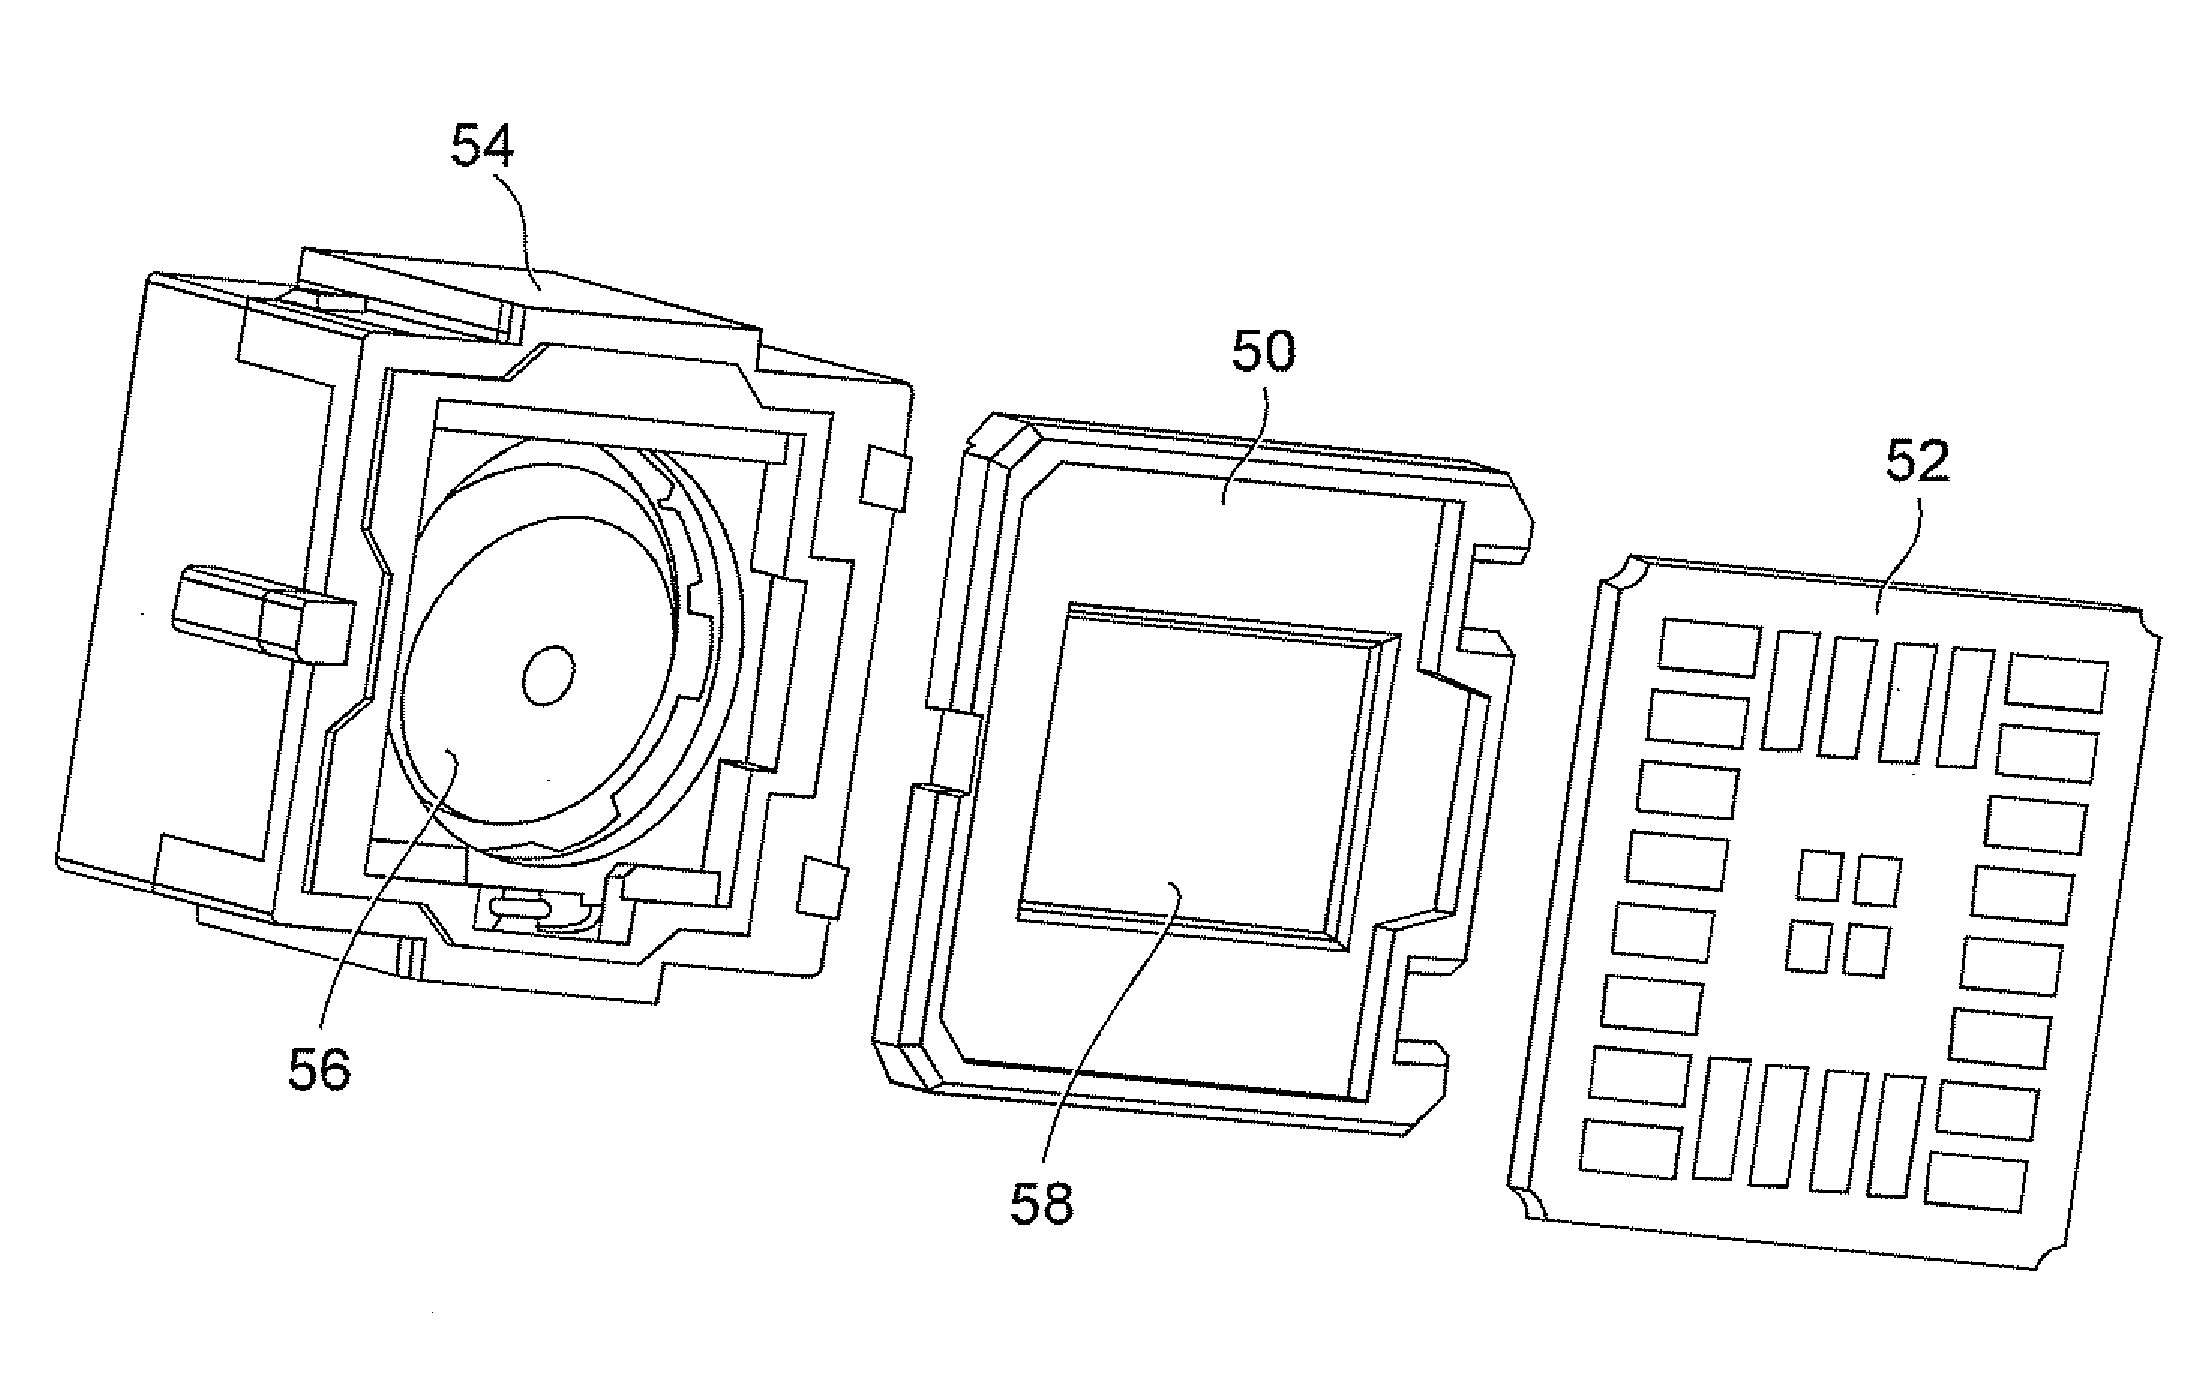 Electromagnetic shielding for camera modules